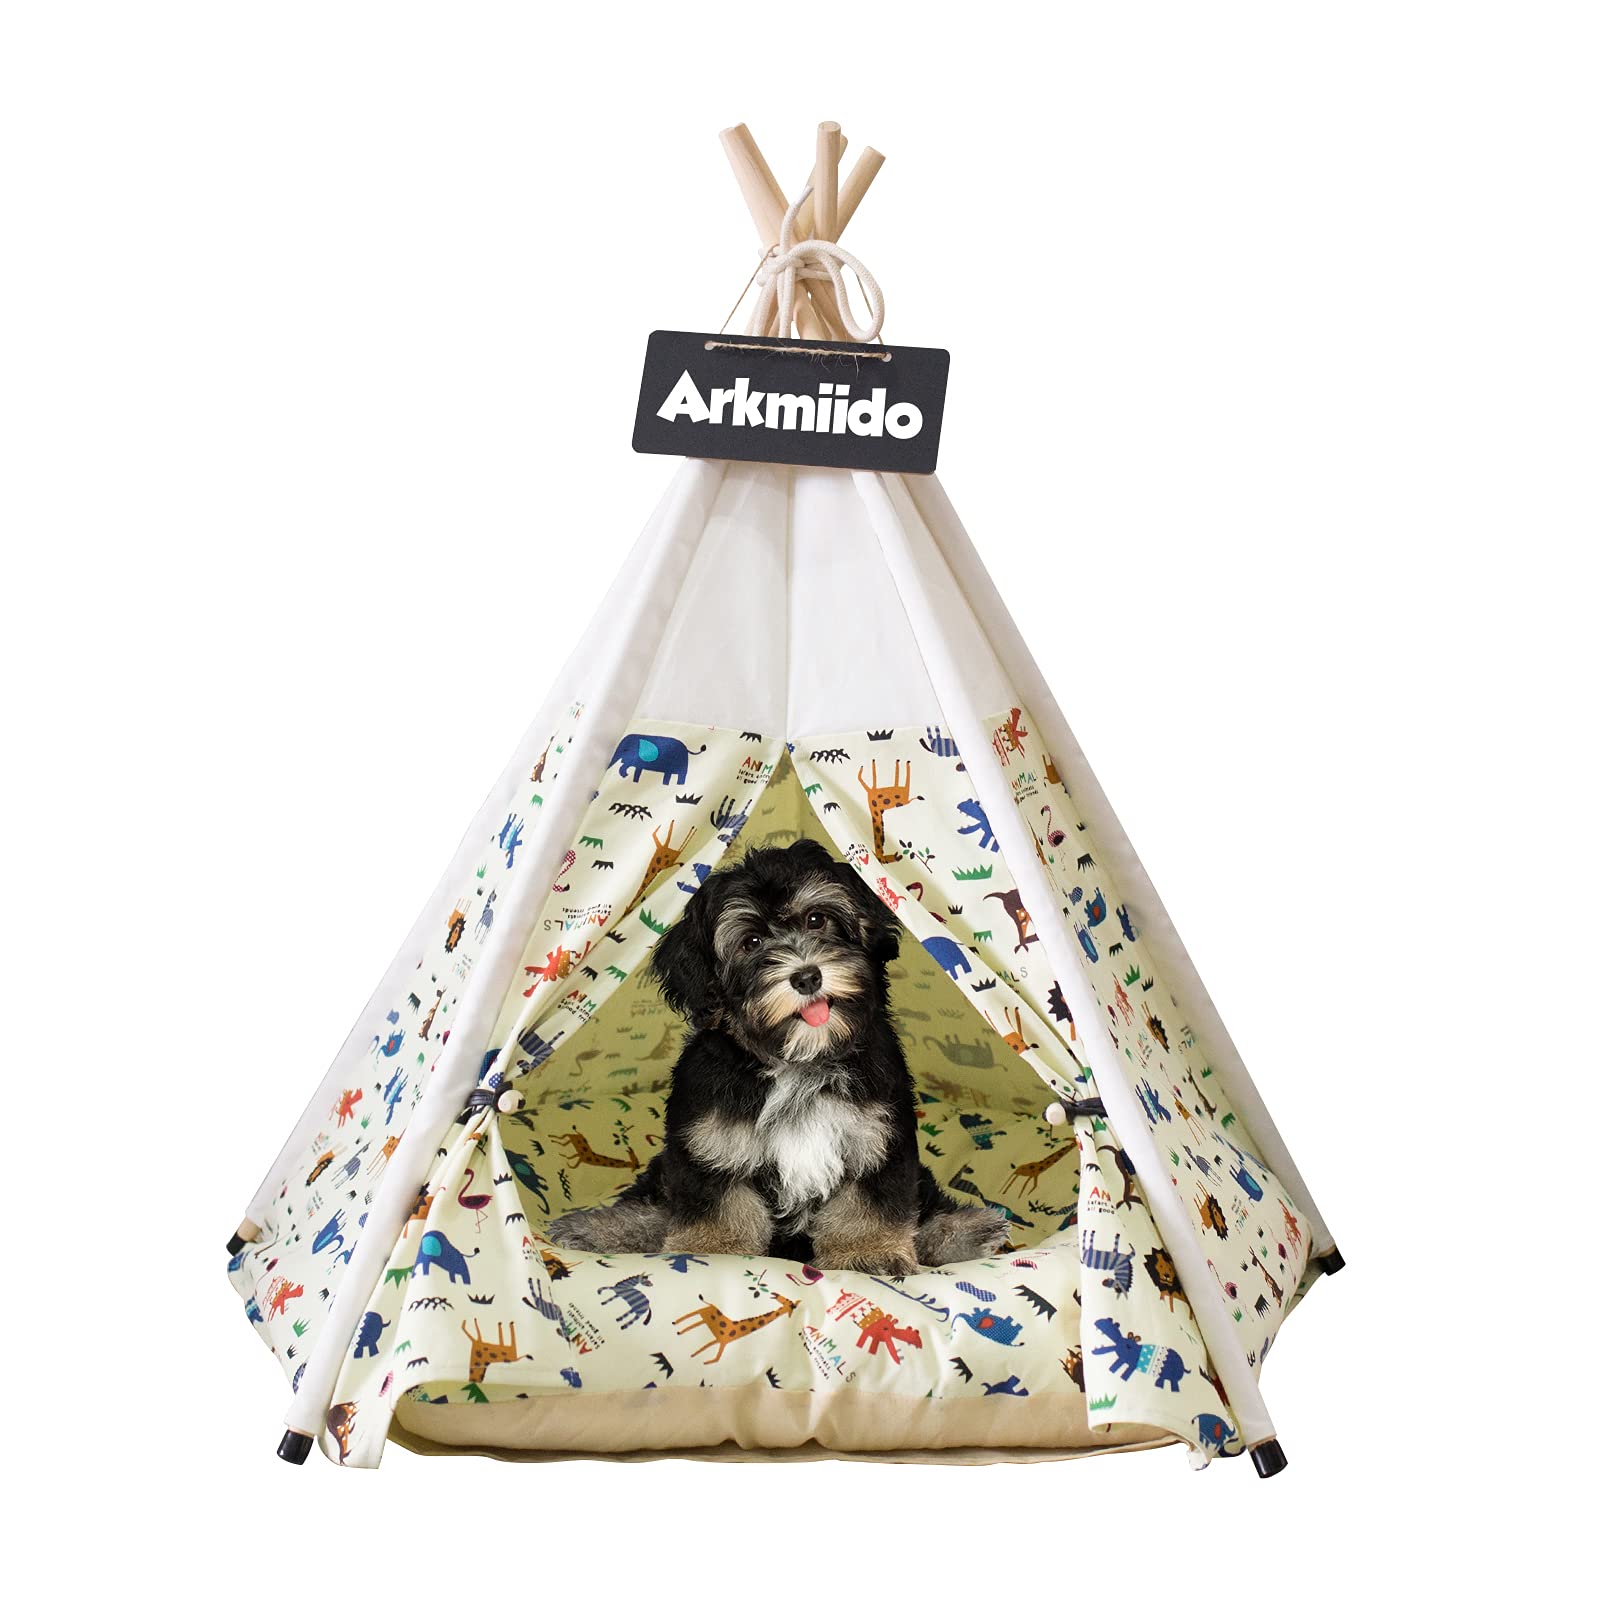 China Gold Supplier for Baby Slide Pool - Arkmiido Pet Teepee Dog & Cat Bed with Cushion — Cute Pet Houses with Cushion 24inch Indoor Outdoor – Ealing